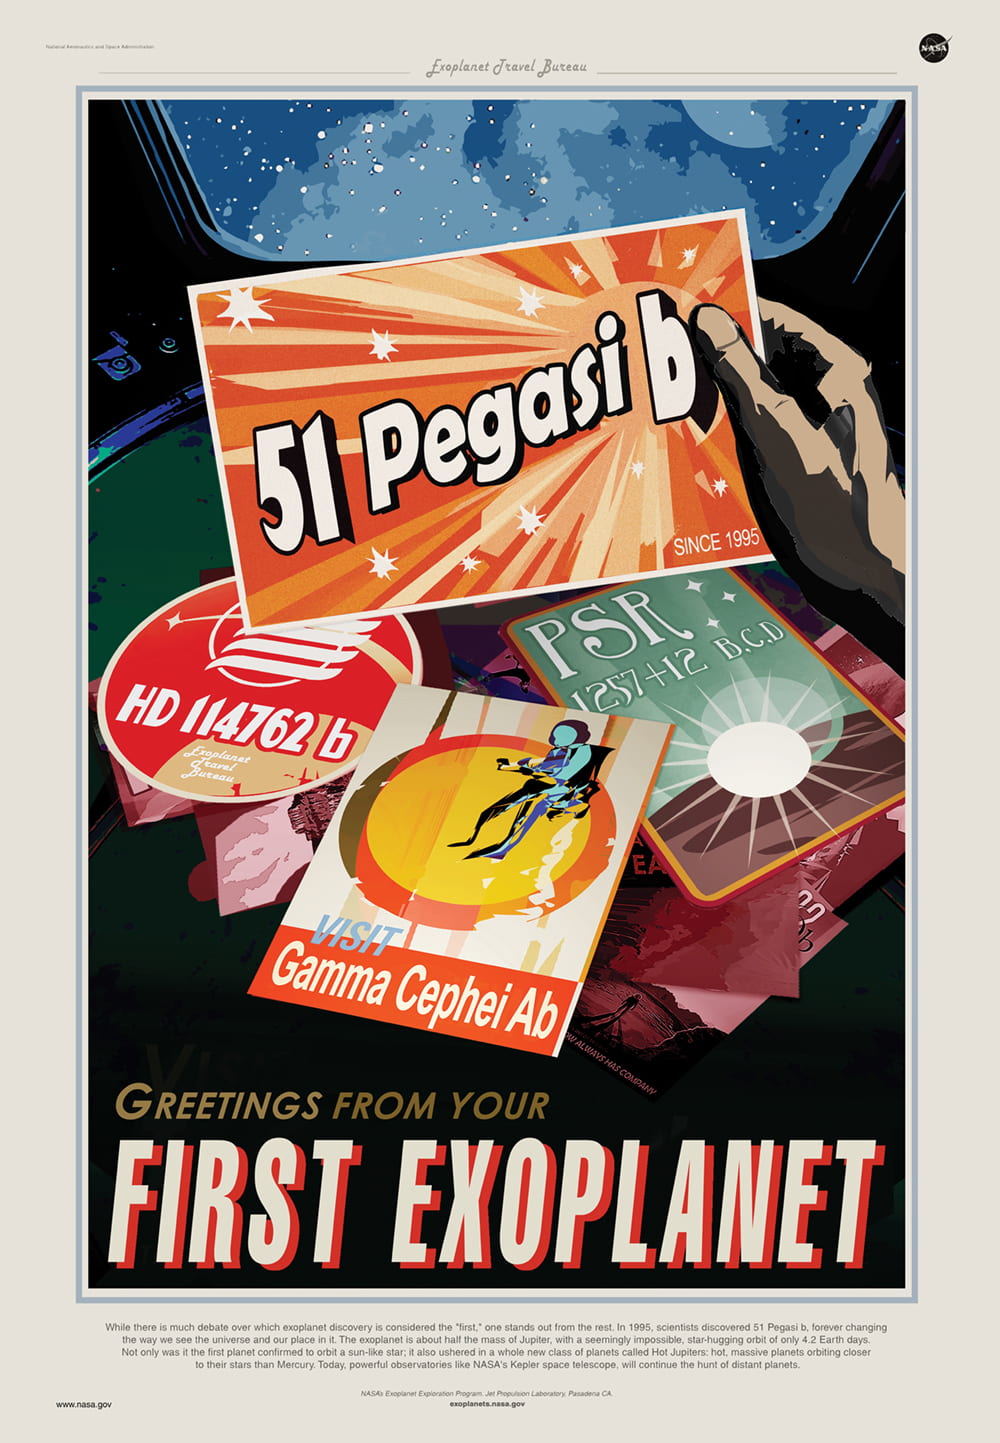 A travel poster for the first exoplanet featuring fake postcards of other planets and a hand holding up one which reads 51 Pegasi b. In the background is a stylised view out a window looking into space. On the bottom it reads Greetings from you first exoplanet